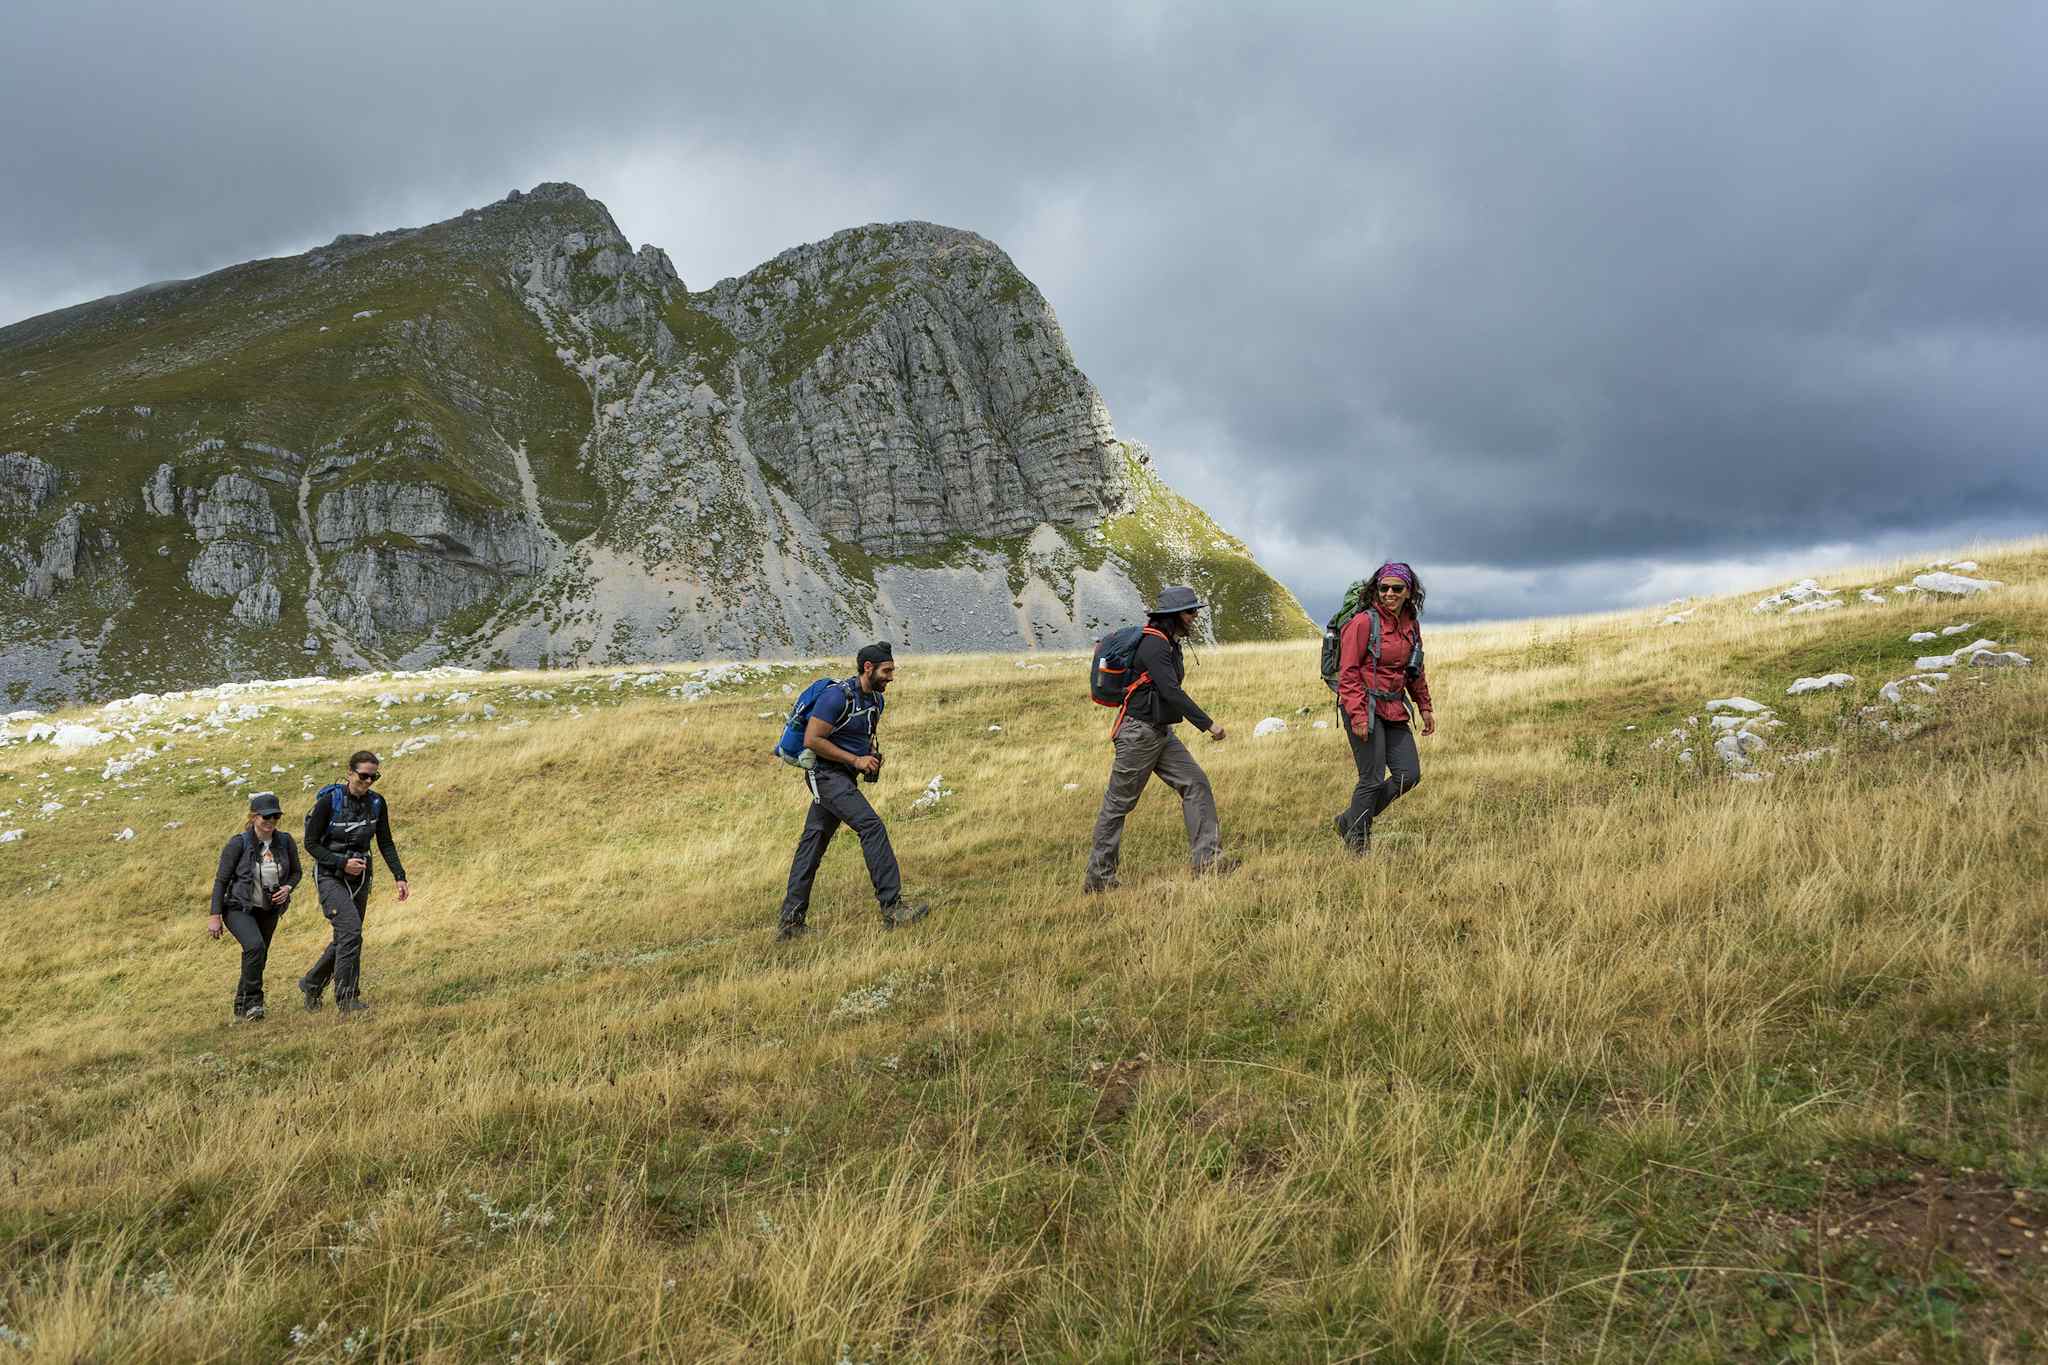 Group hiking in the Abruzzo NP, Italy. Photo: Host/Wildlife Adventures